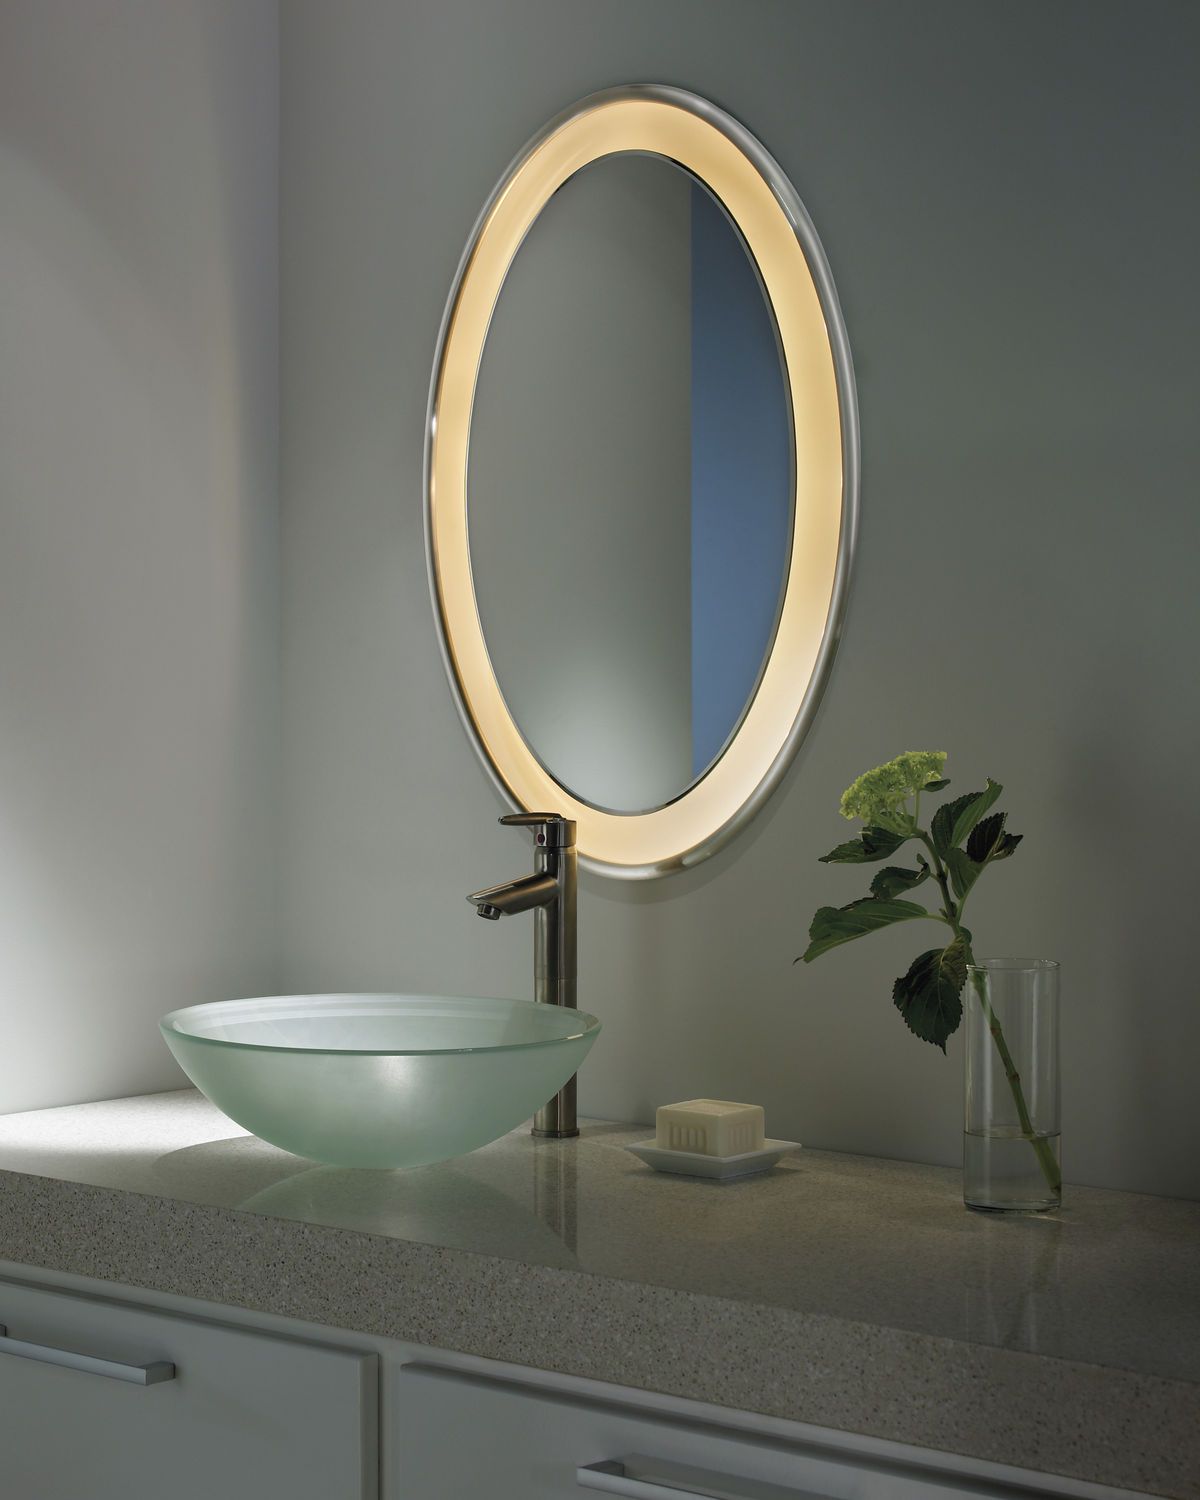 The Best Wall Mirror Design For Your Bathroom In Elegant Shape That You With Regard To Vanity Mirrors (View 14 of 15)